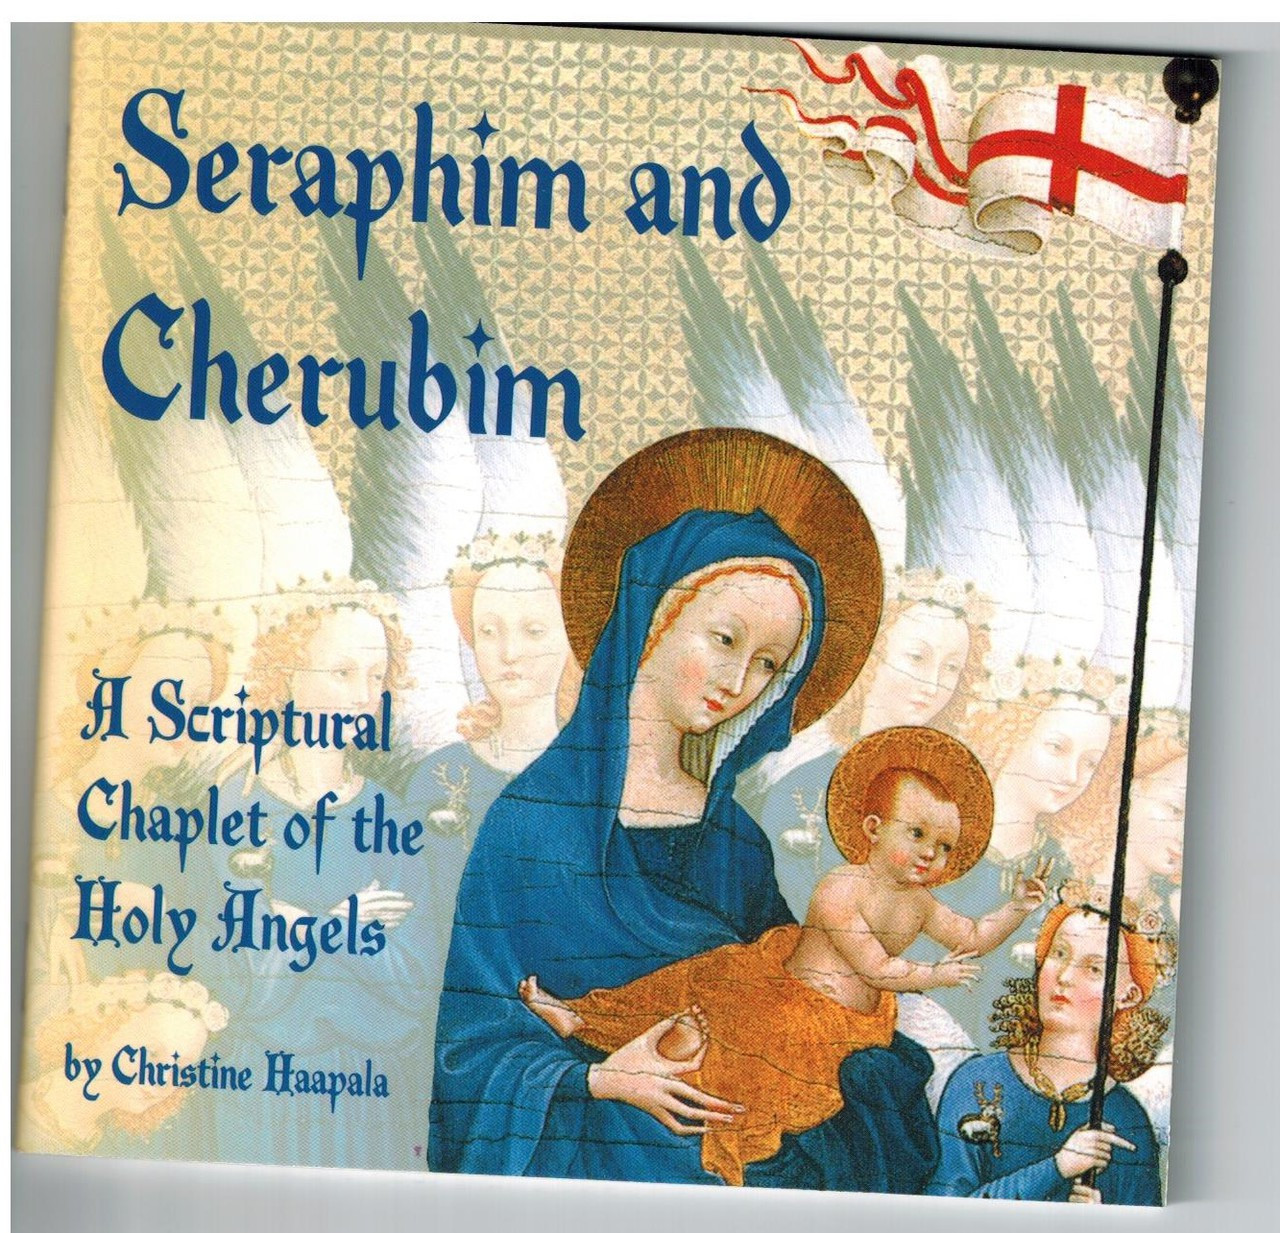 Seraphim and Cherubim: A Scriptural Chaplet of the Holy Angels